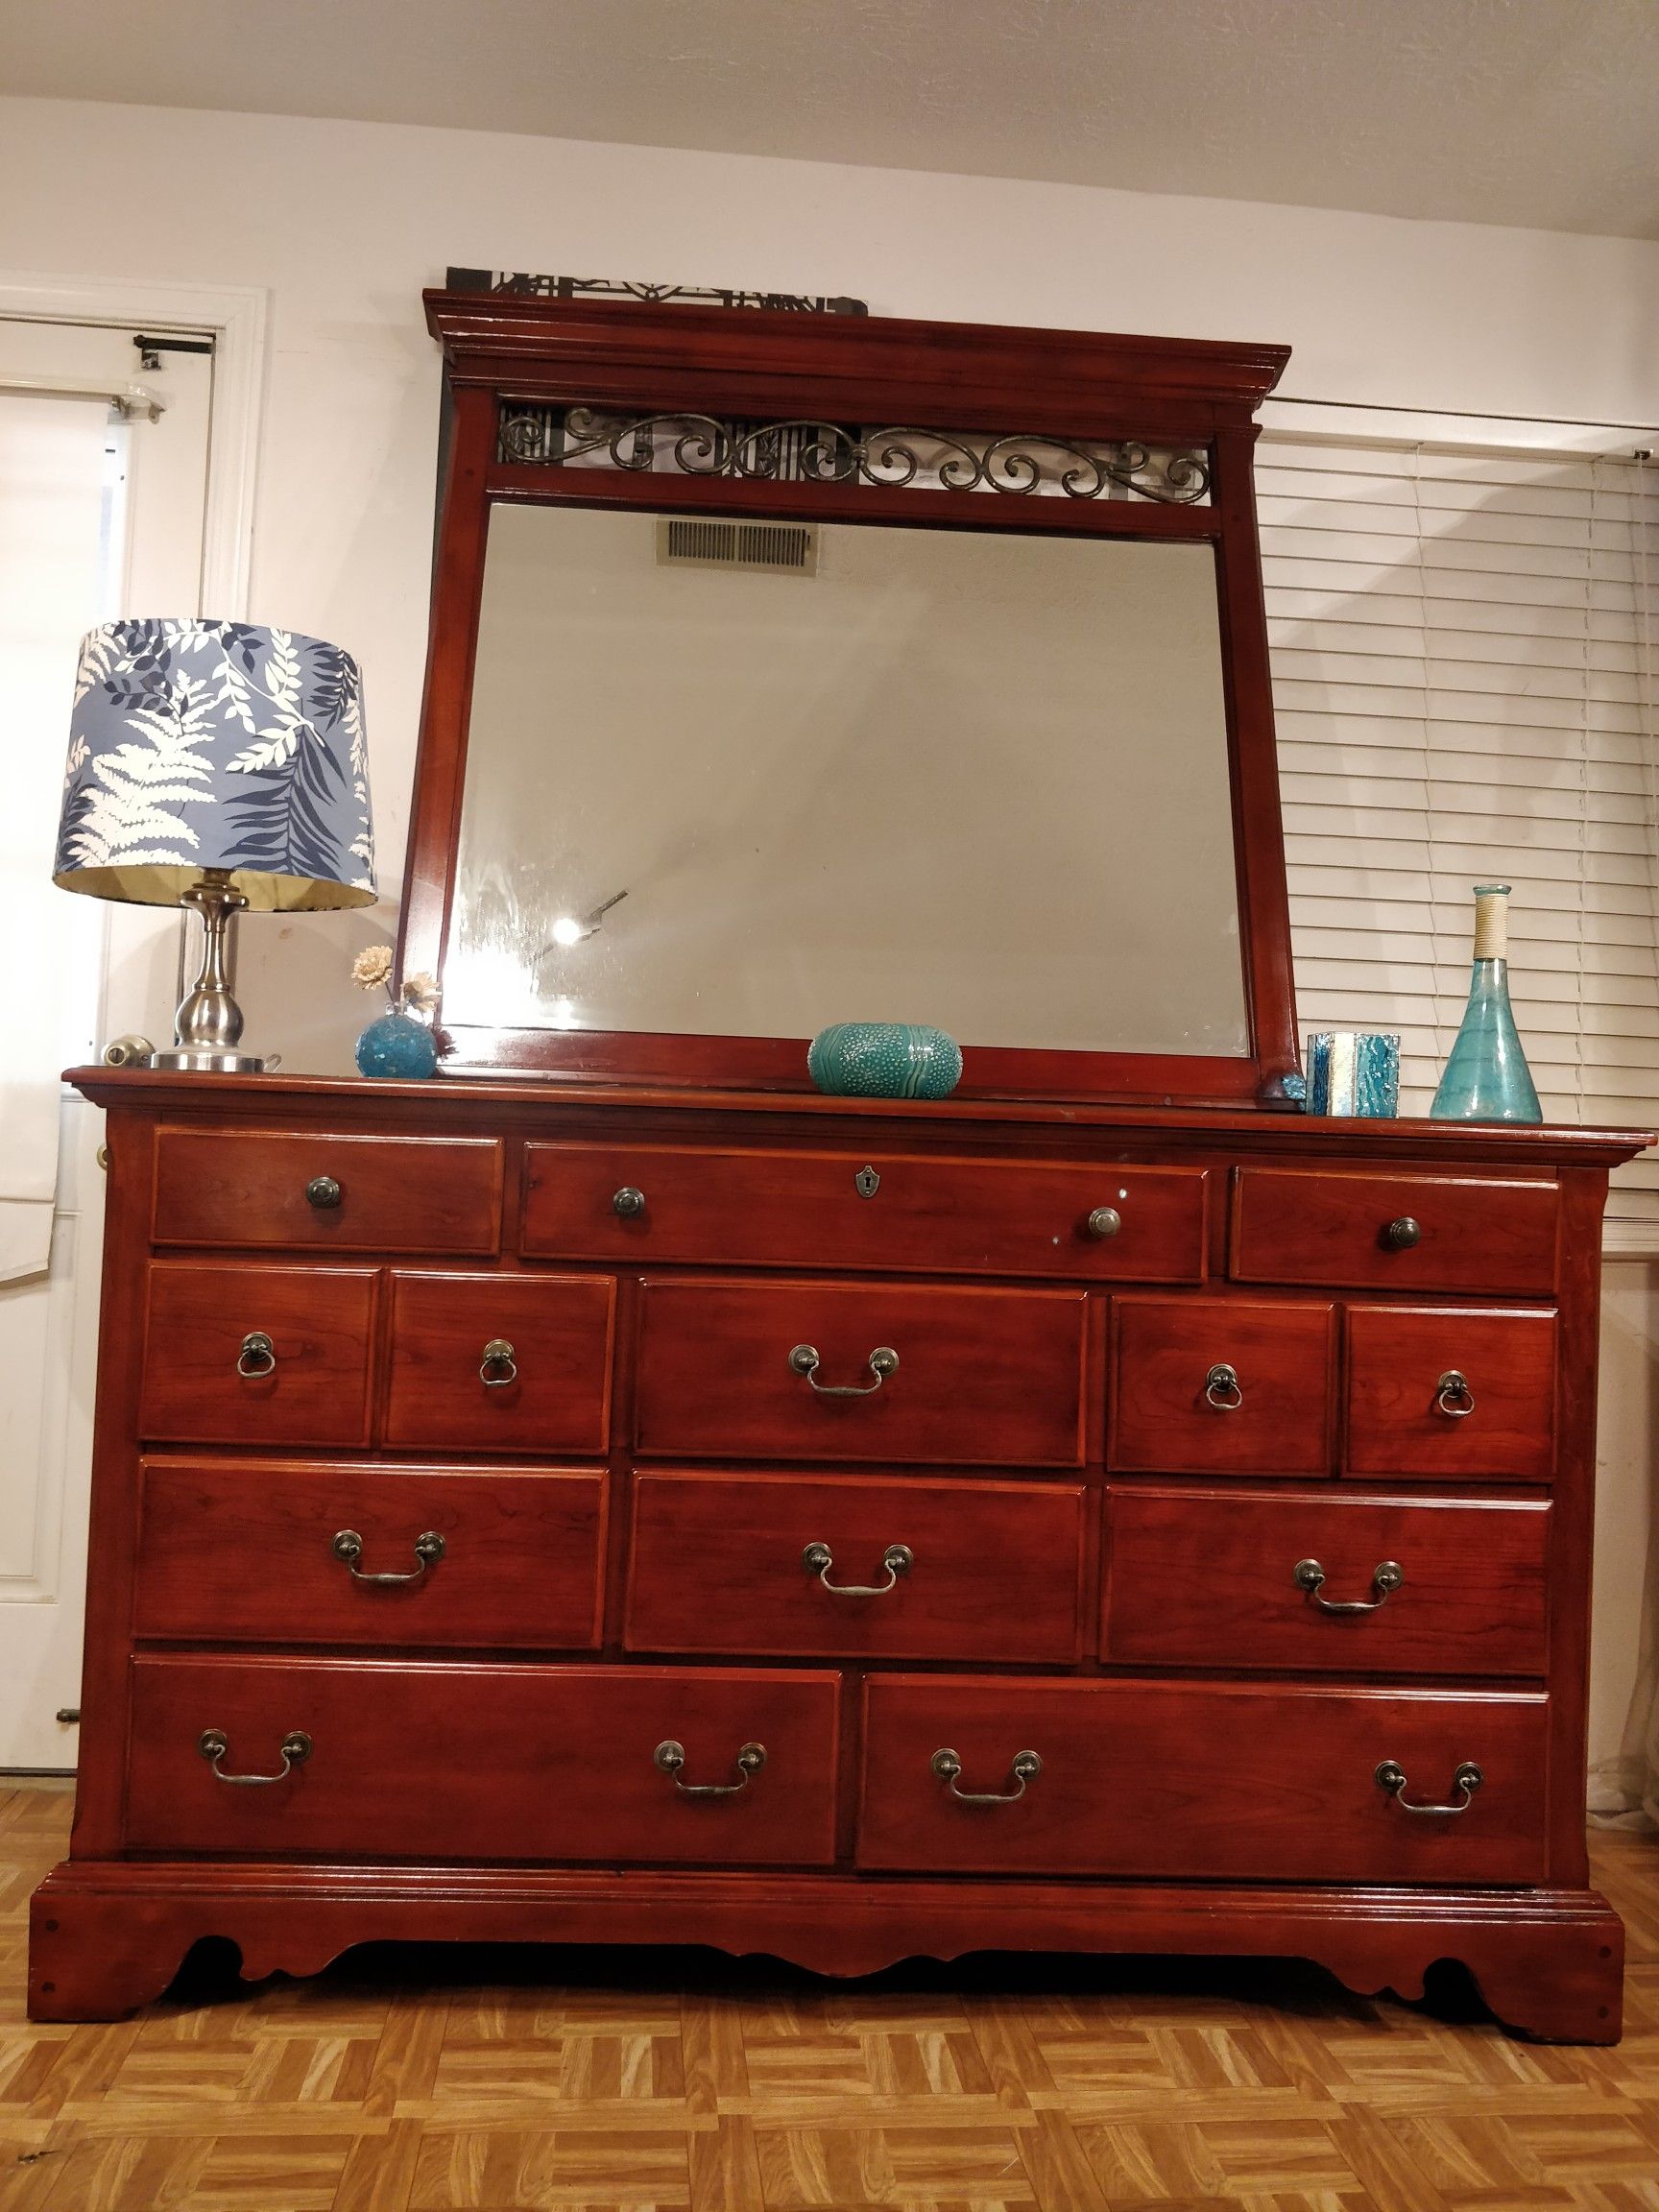 Big modern wooden JCPENNEY HOME COLLECTION dresser with 11 drawers & big mirror in great condition, all drawers working well,